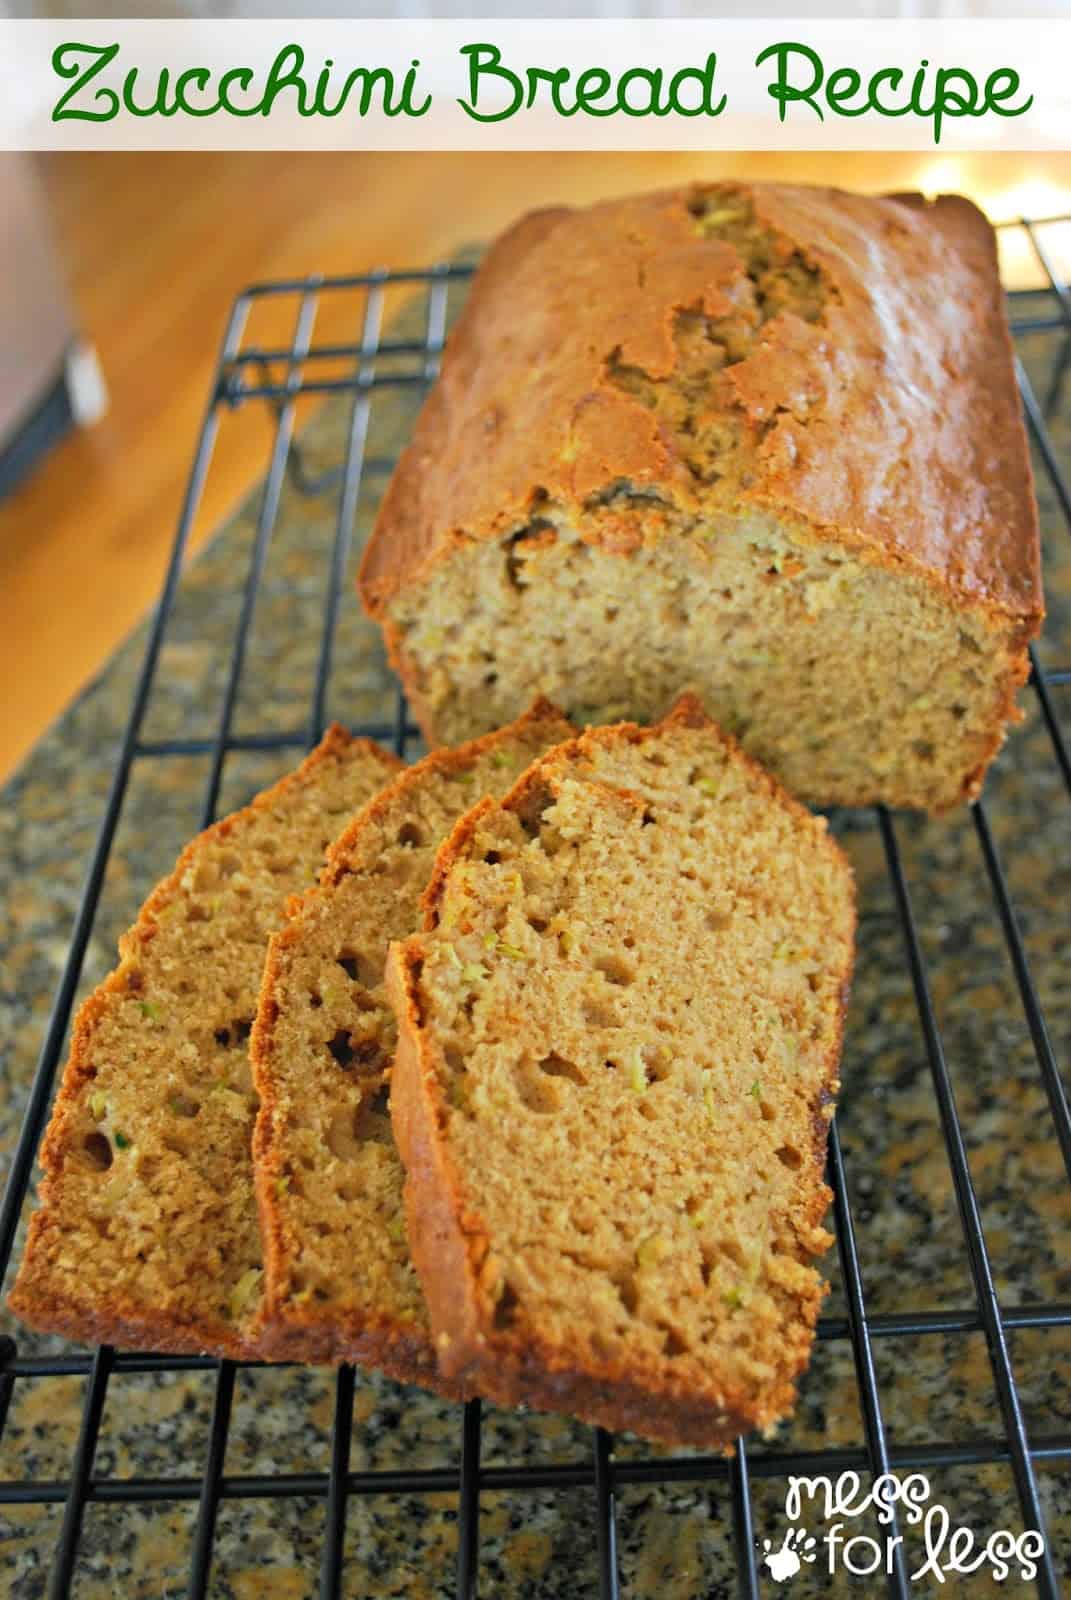 Zucchini Bread Recipe - I made this recipe with my veggie avoiding kids who then proceeded to gobble it up. So good warm and slathered with butter!